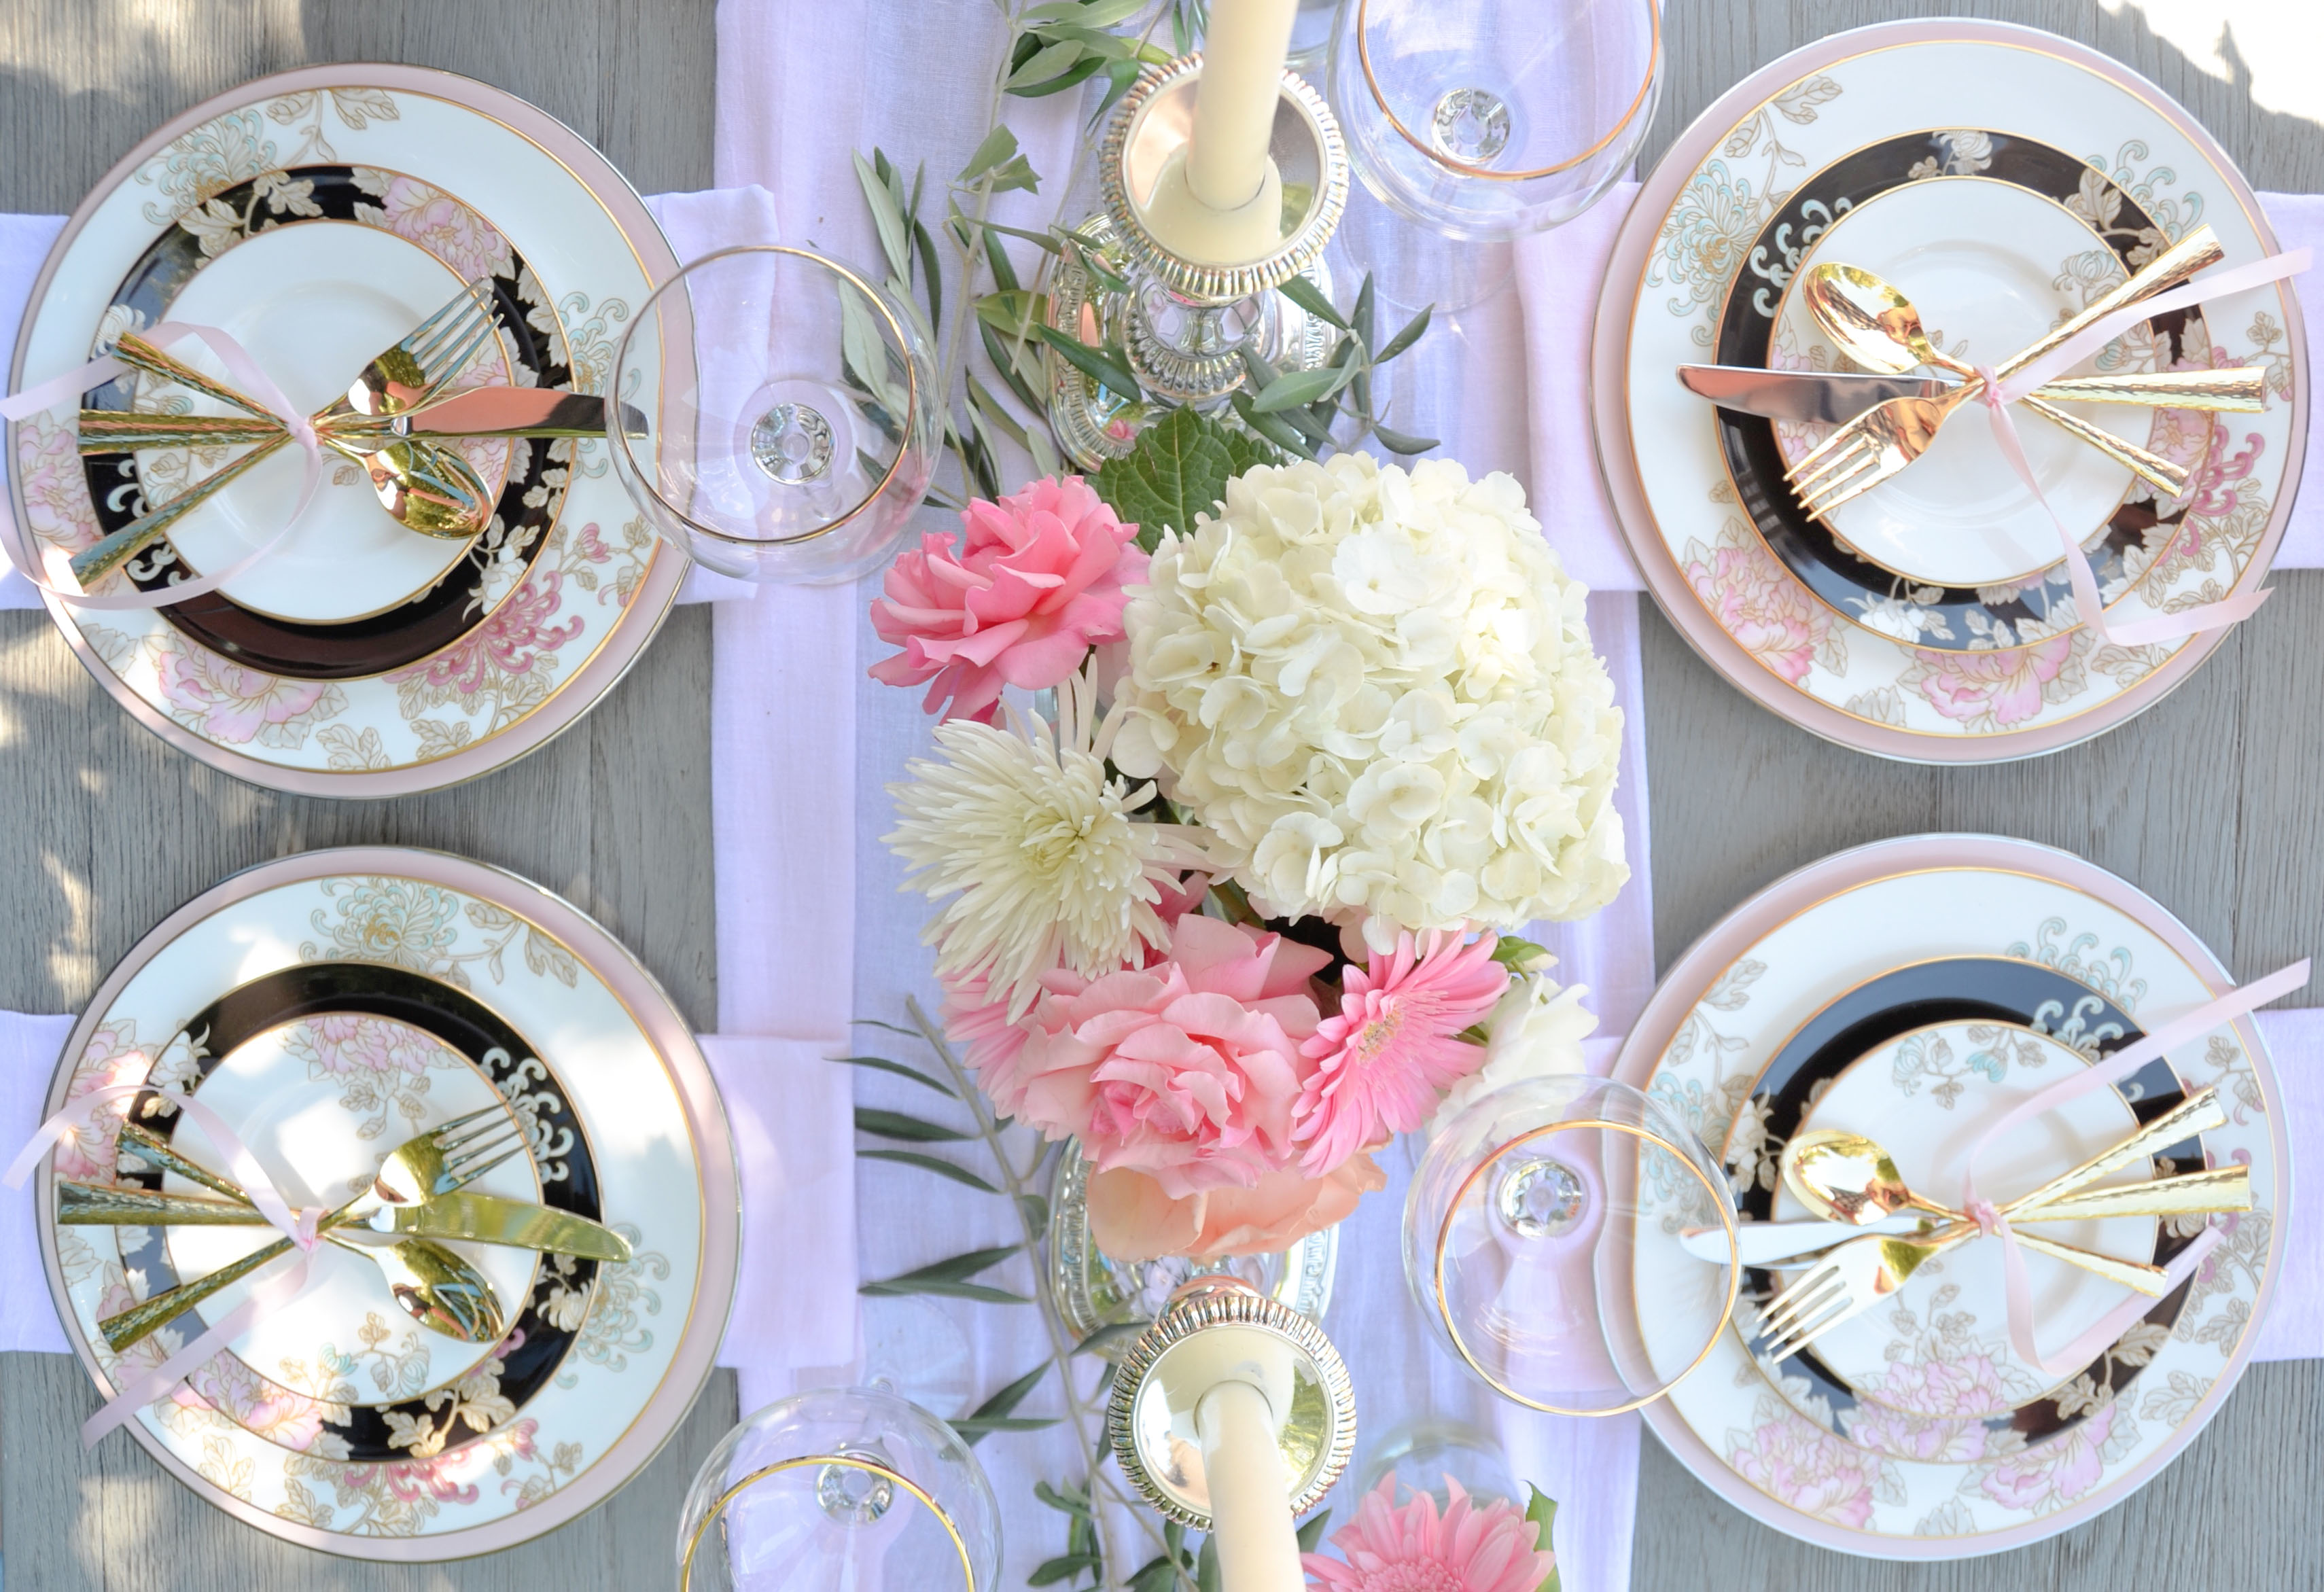  Marchesa's 'Painted Camellia' Dinnerware, Imperial Caviar Table setting with Table + Dine by Stefanie of The Style Safari